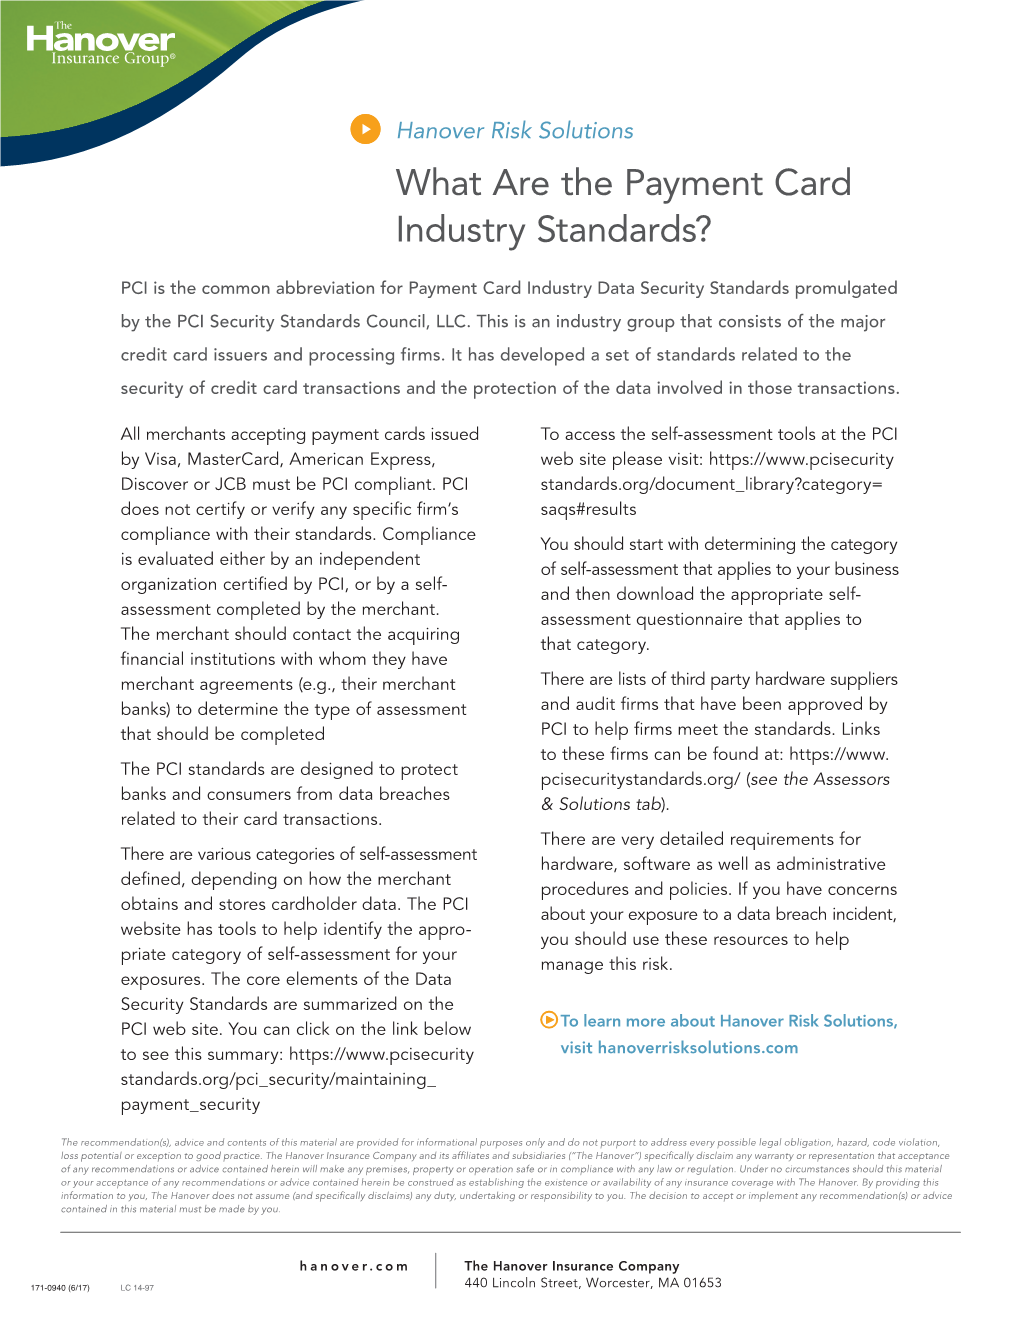 What Are the Payment Card Industry Standards?